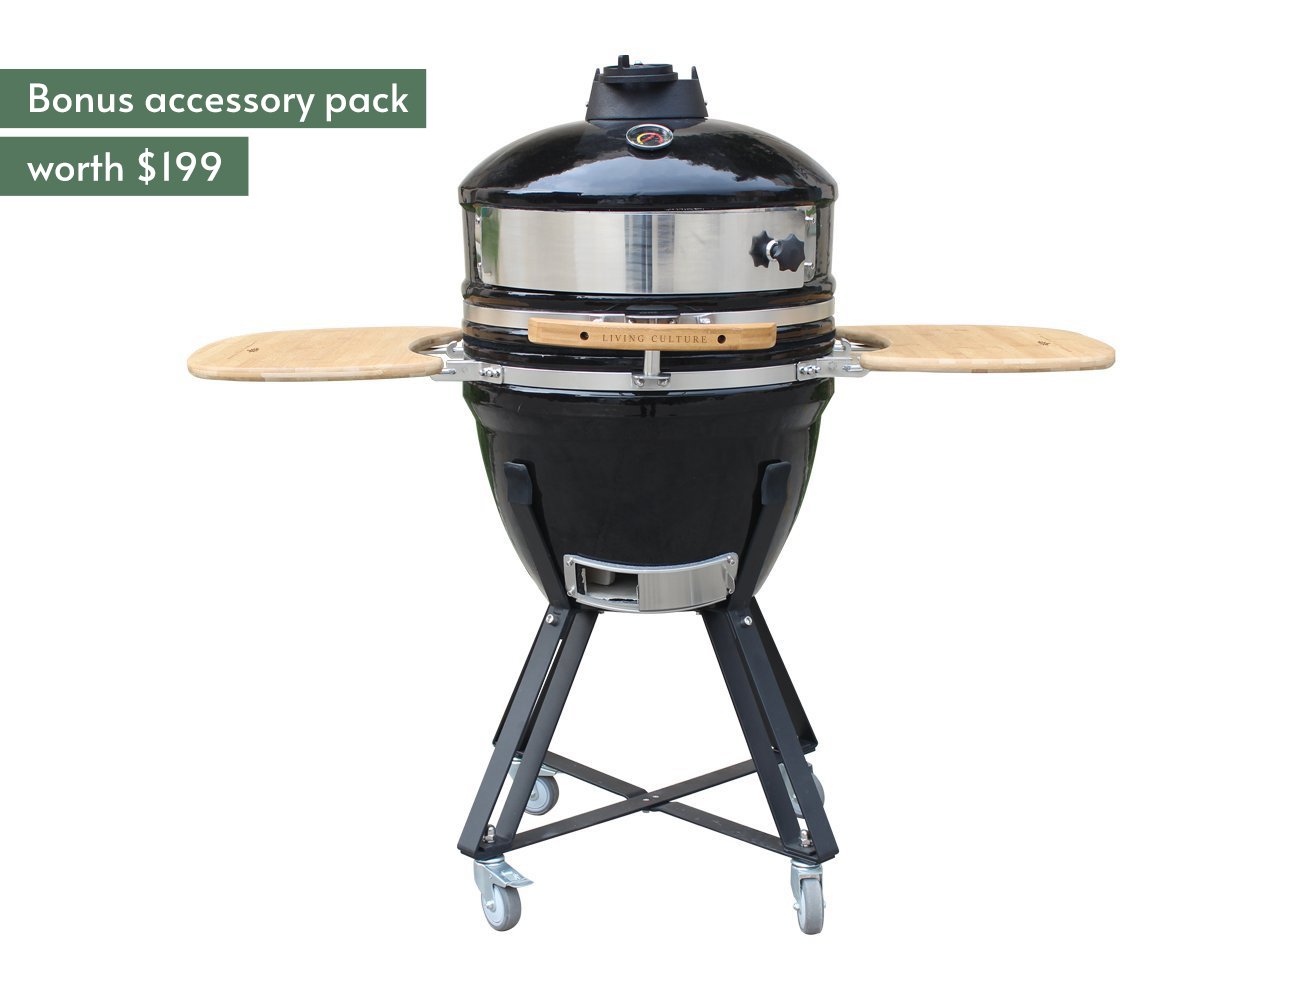 21" Kamado Pizza Grill Black + Accessory Pack